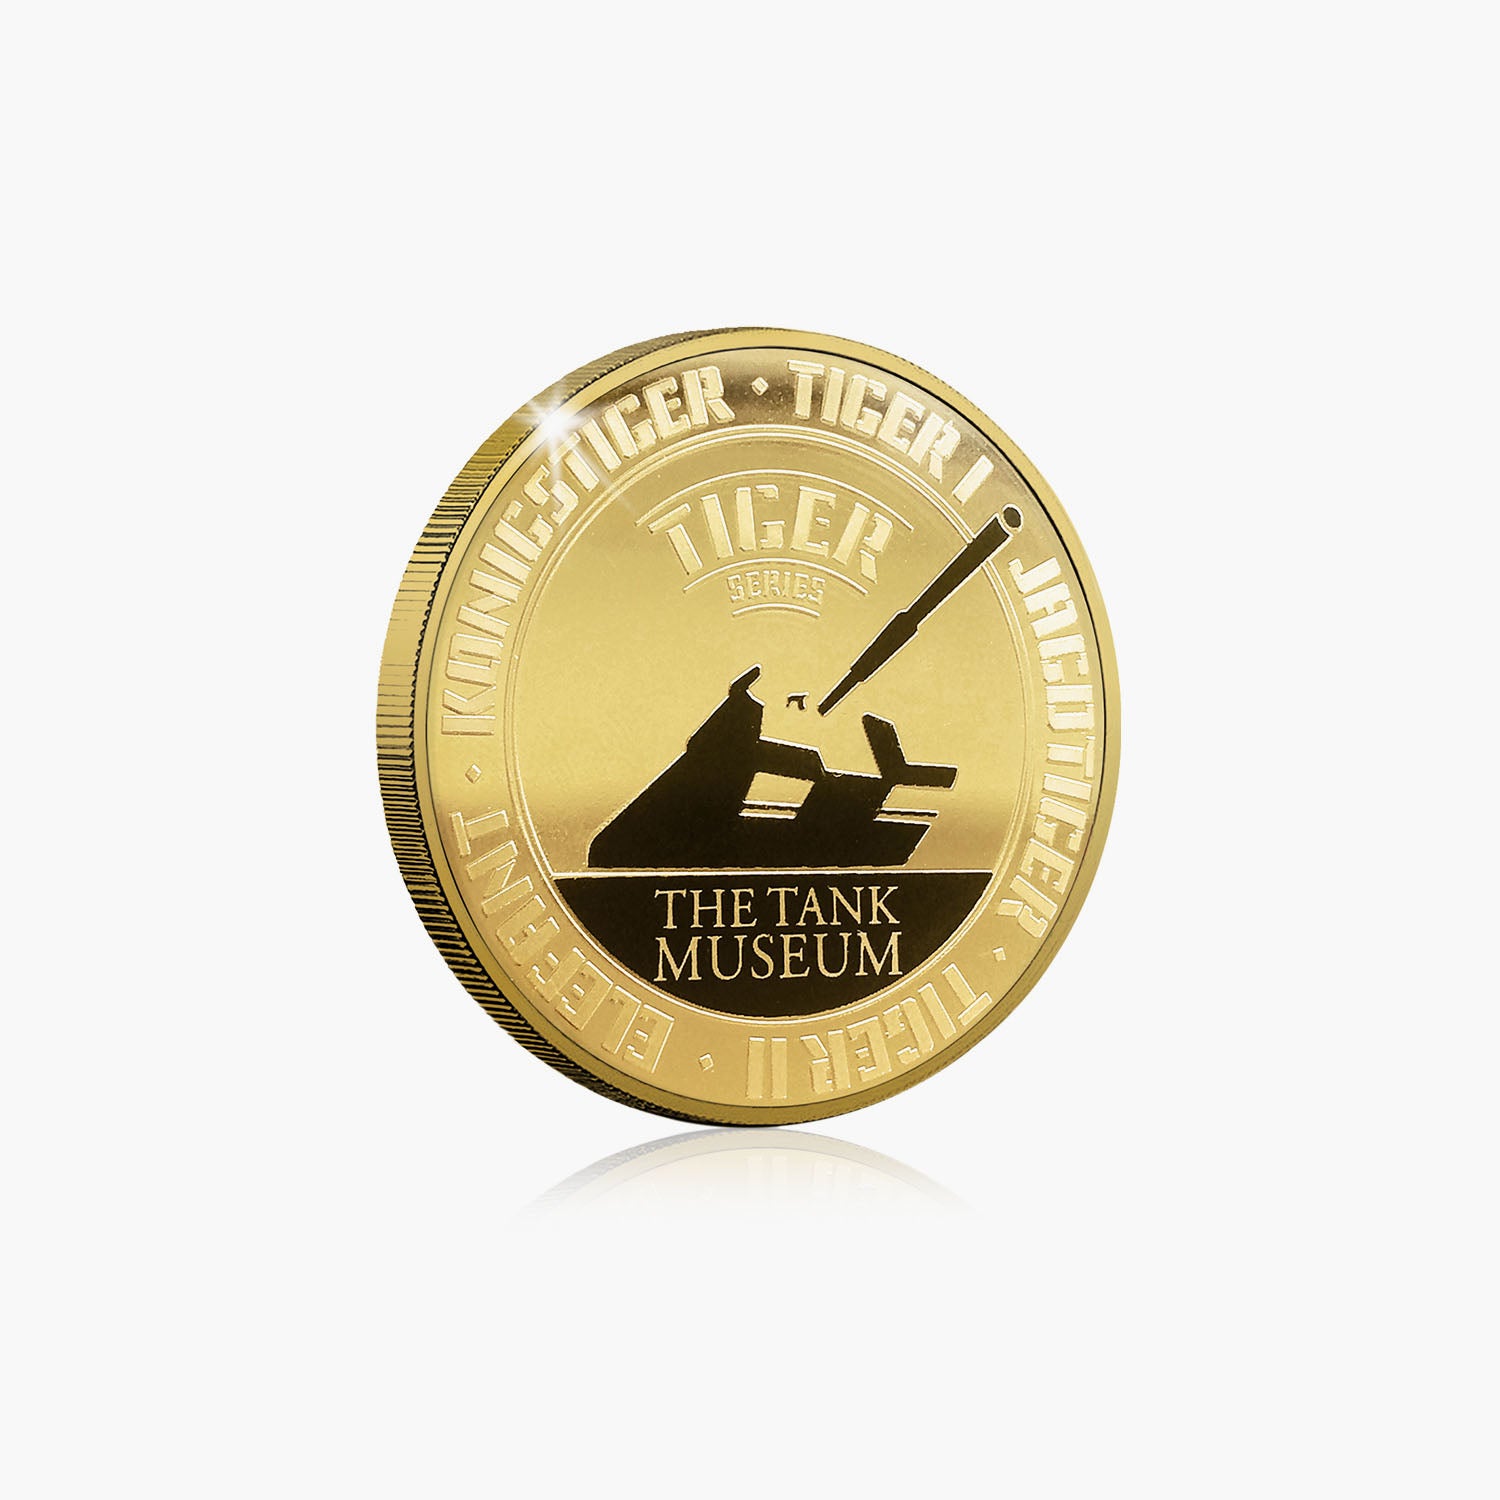 Tiger I Gold-Plated Commemorative